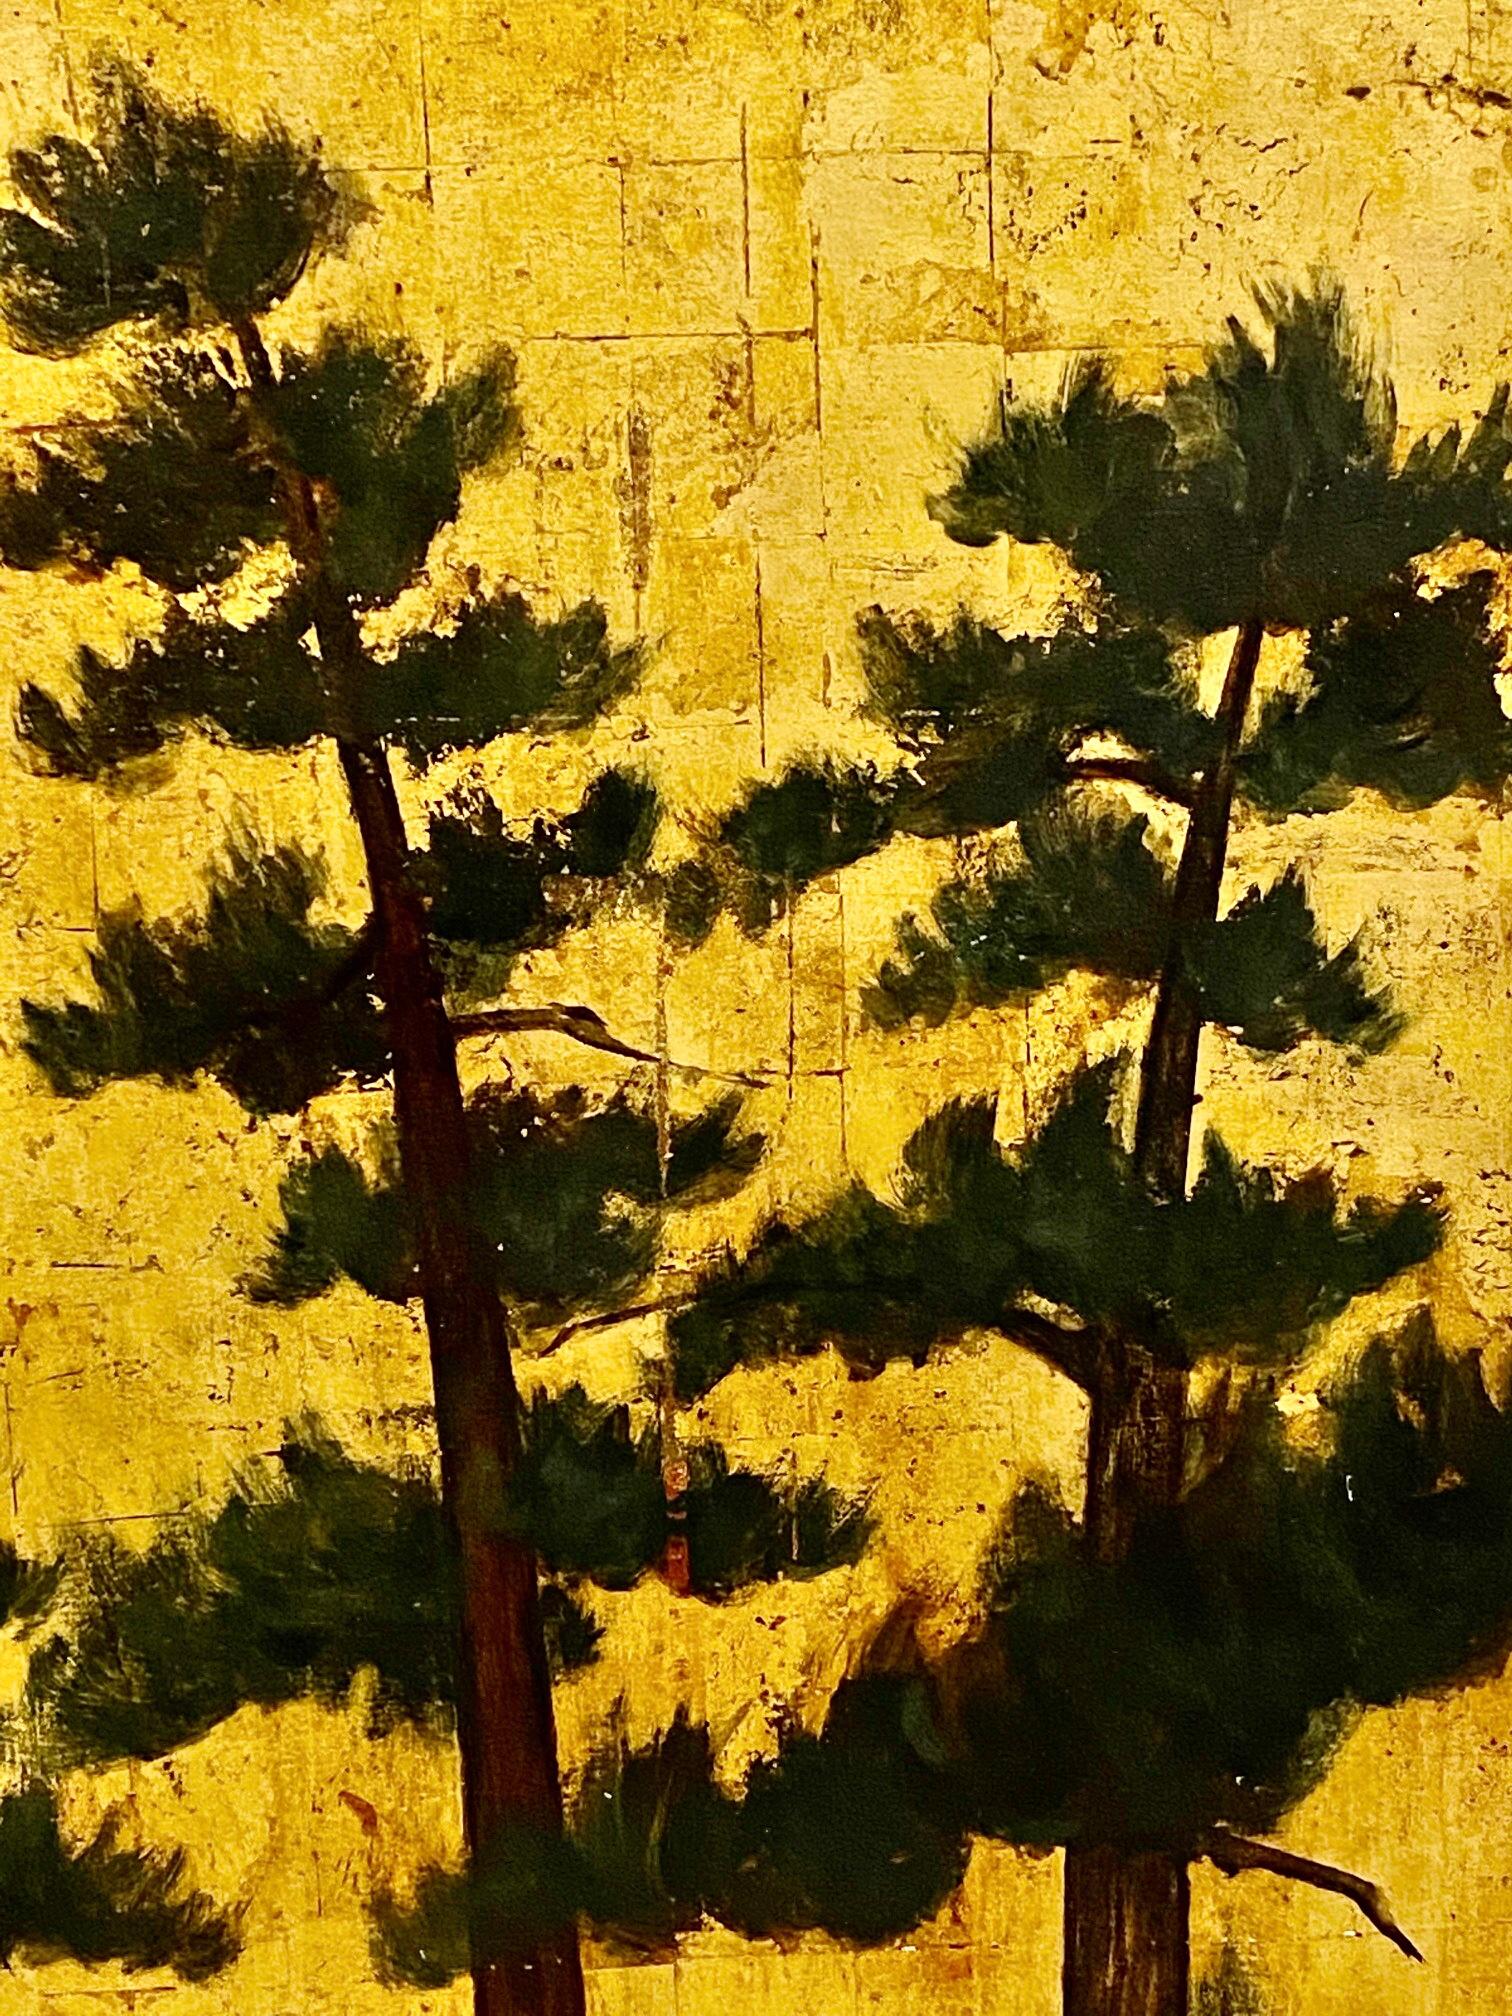 Exceptional Large 19th Century Triptych of Pine Trees Against Gold Leaf Sky 5